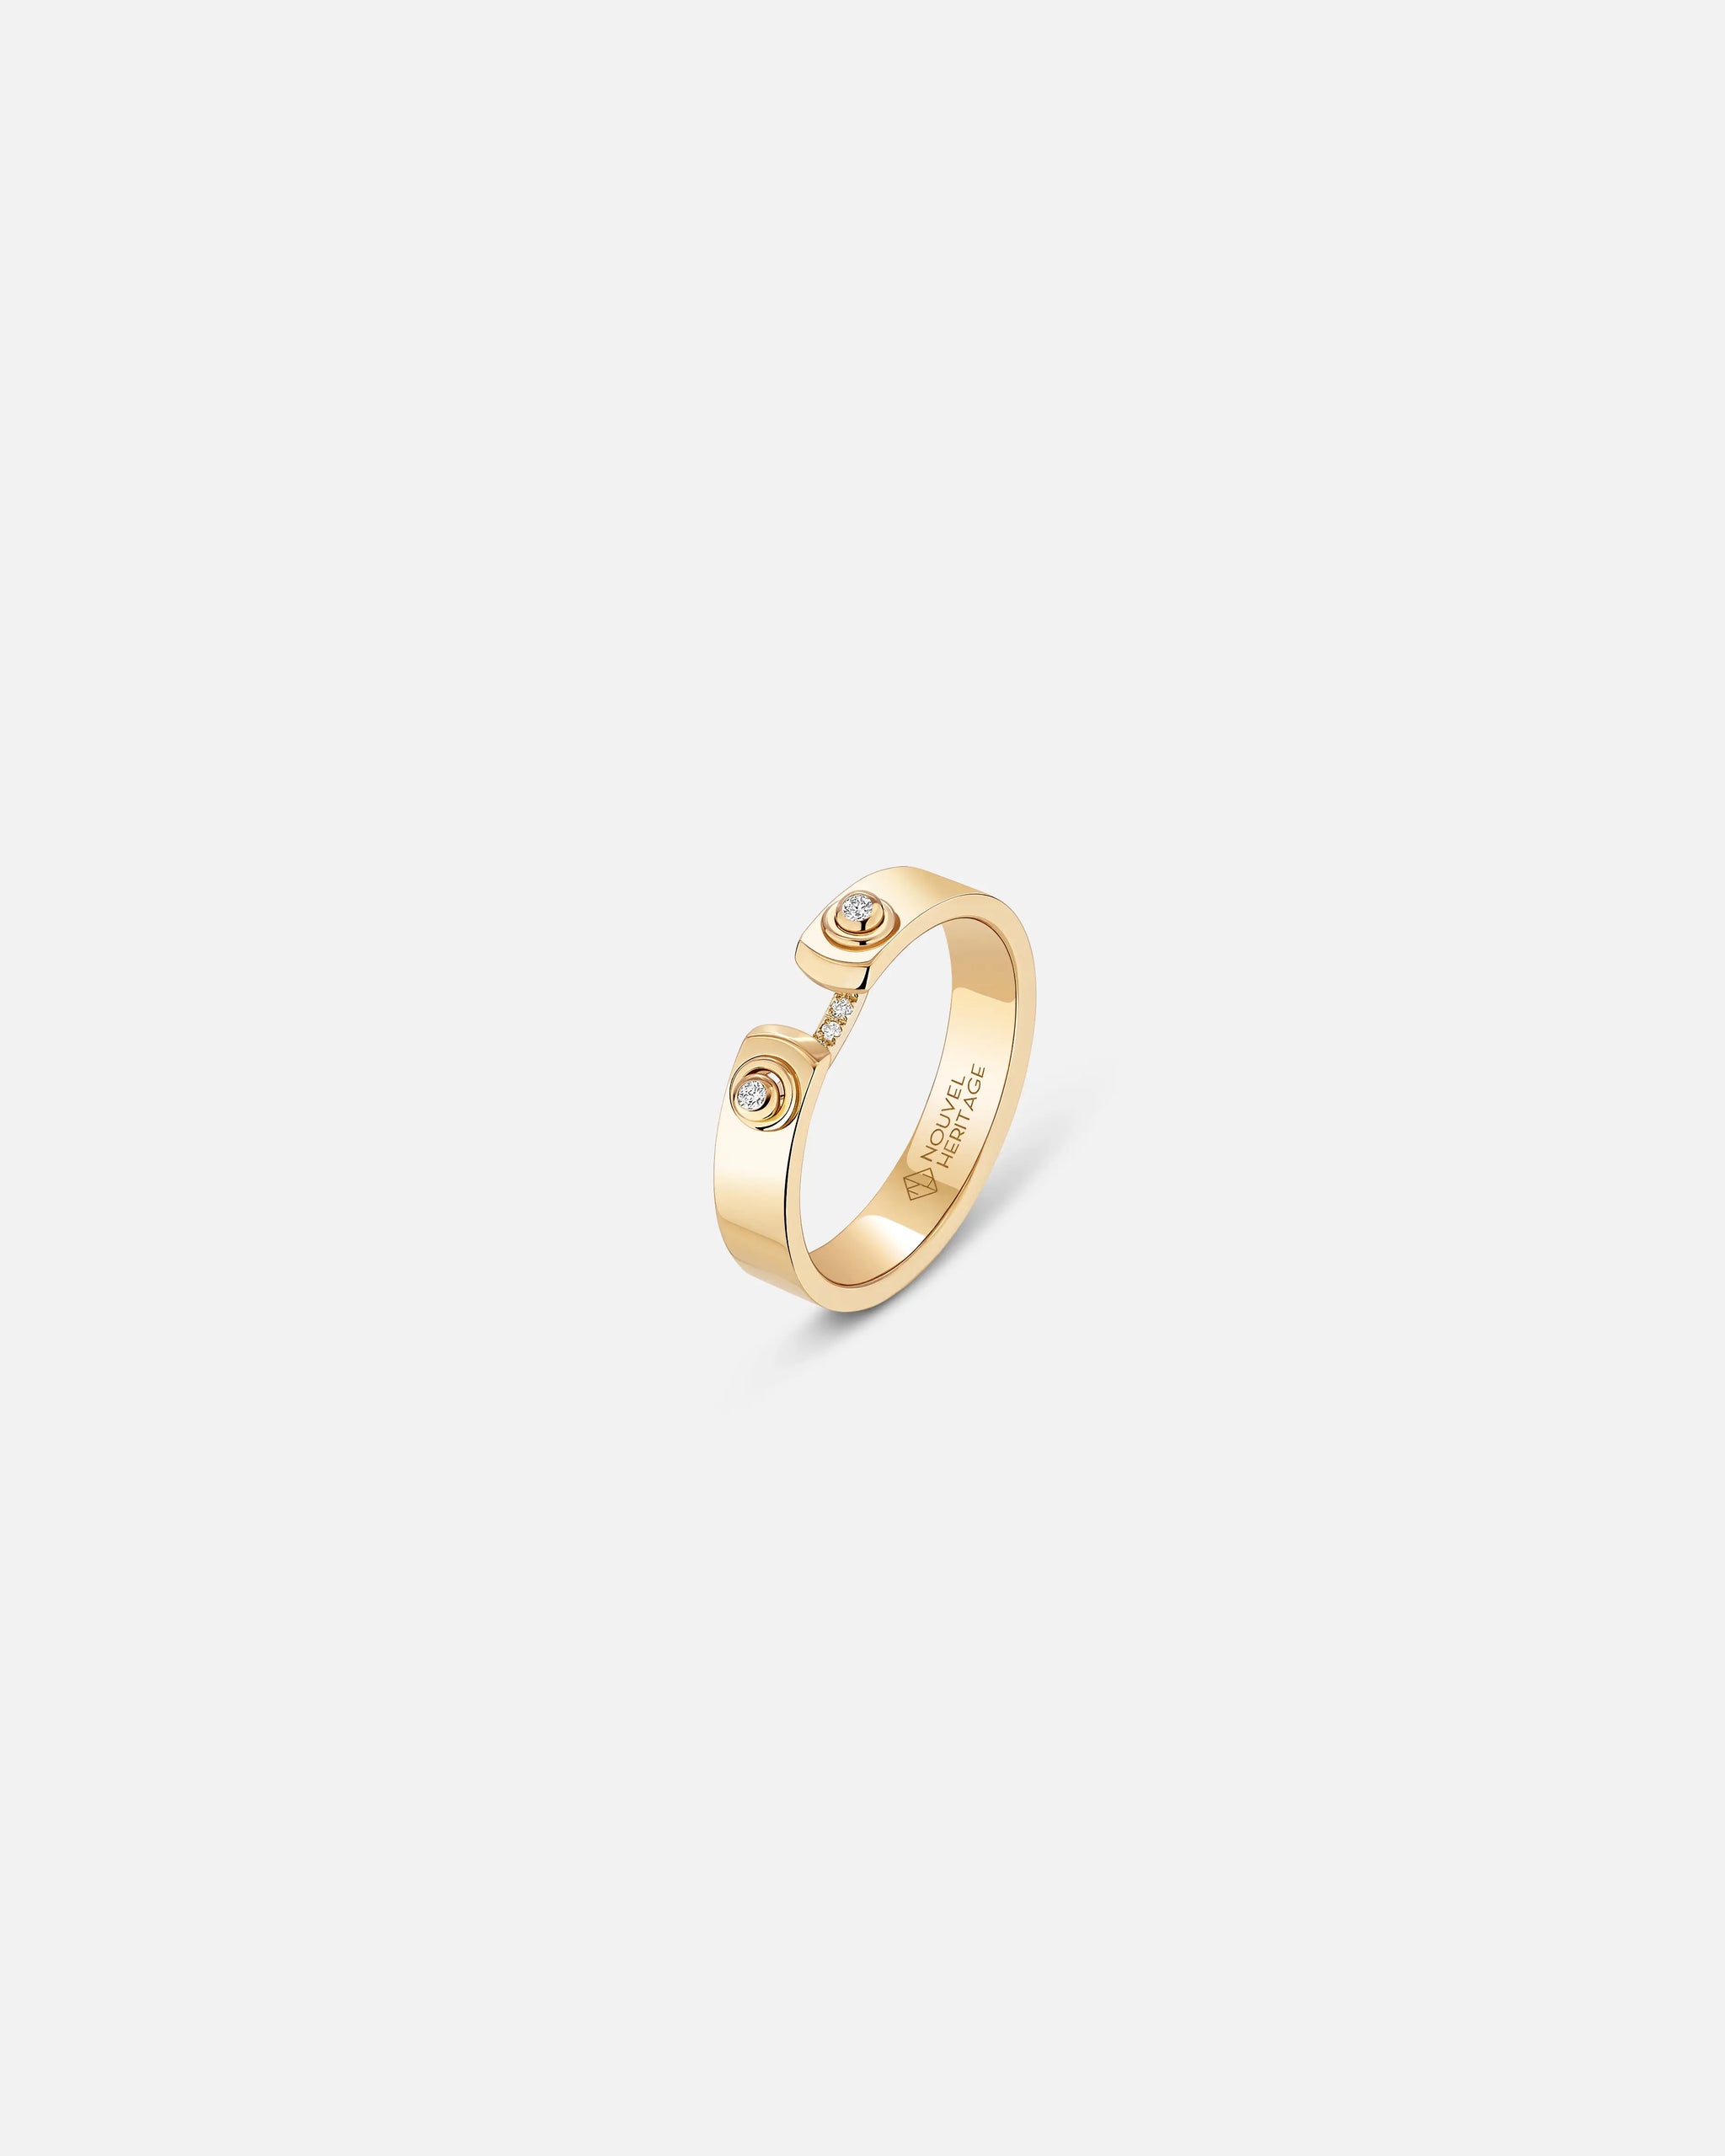 Business Meeting Mood Ring in Yellow Gold - 1 - Nouvel Heritage